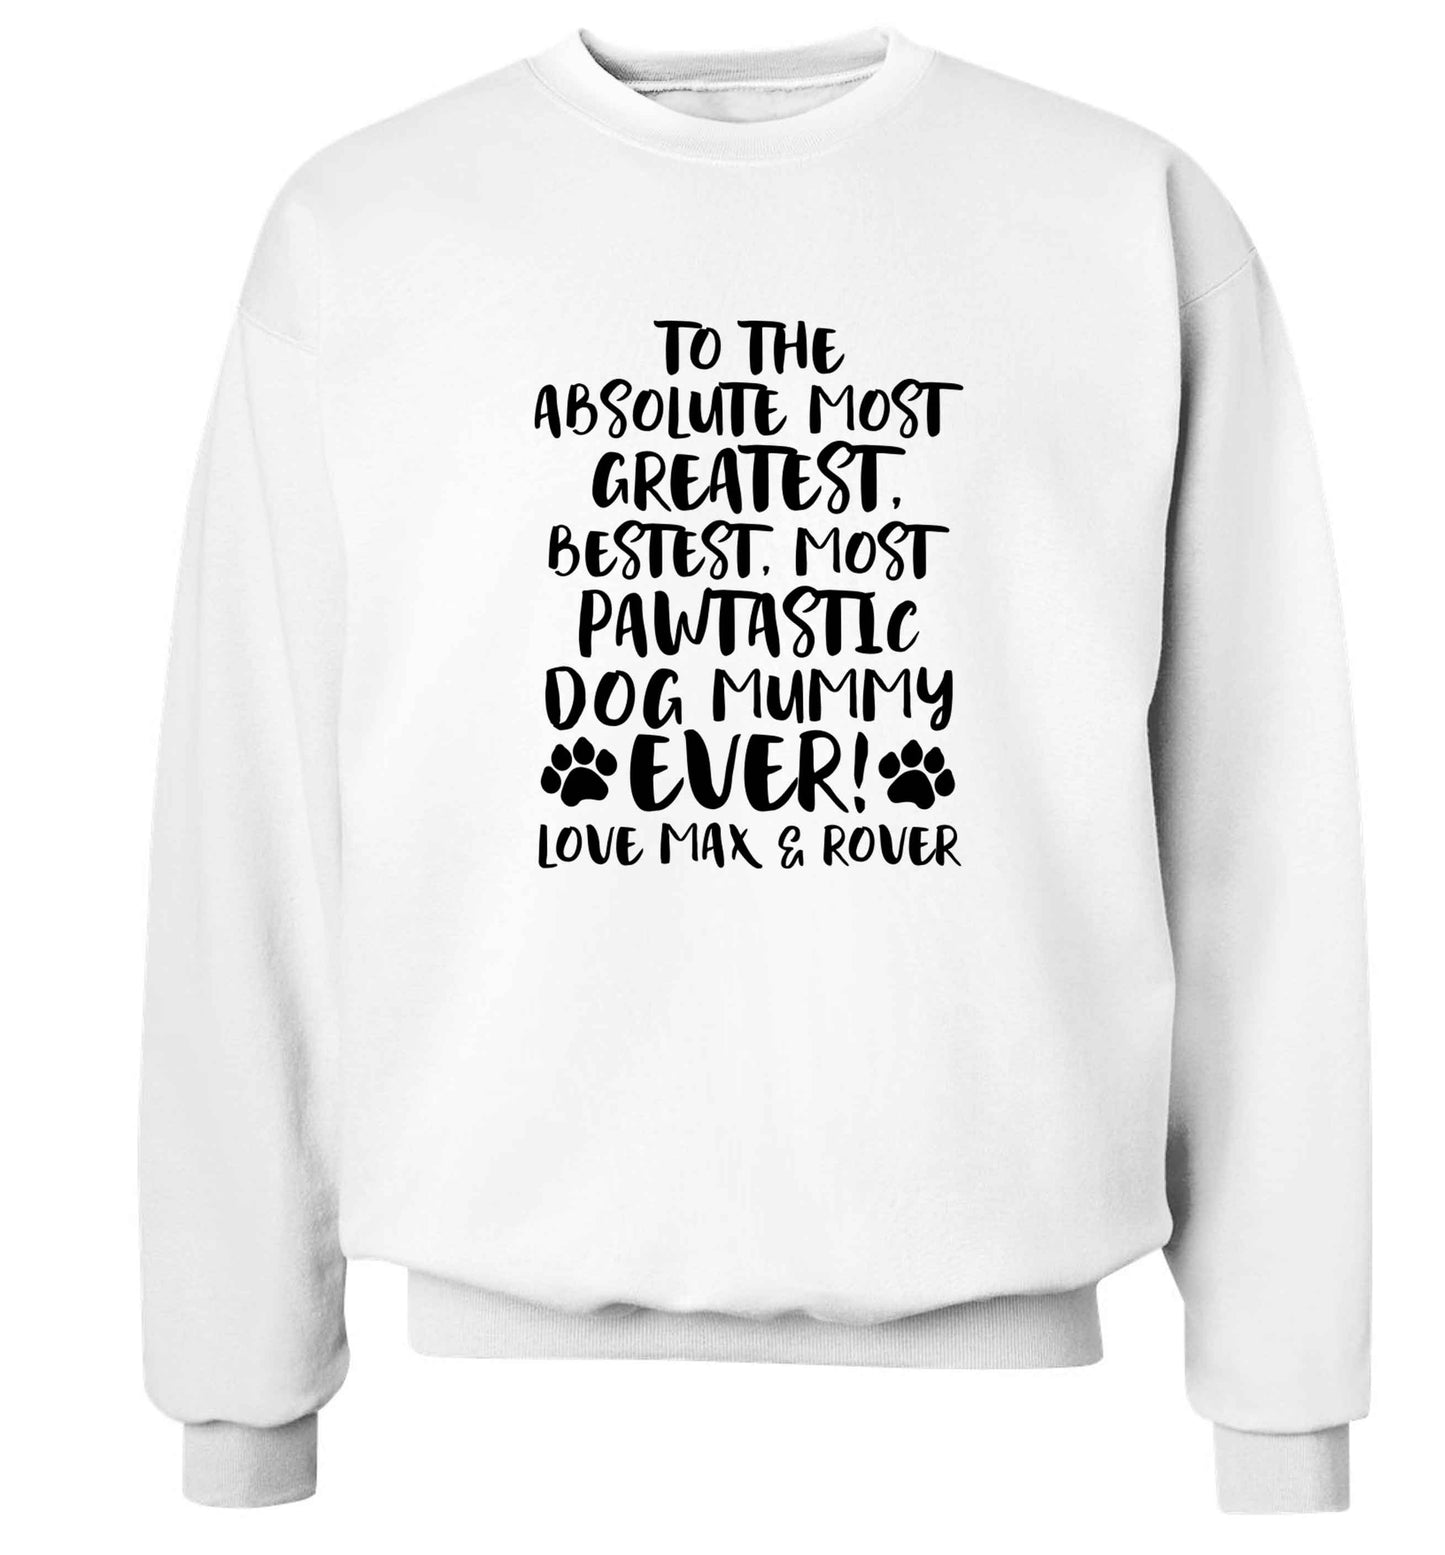 Personalsied to the most pawtastic dog mummy ever Adult's unisex white Sweater 2XL